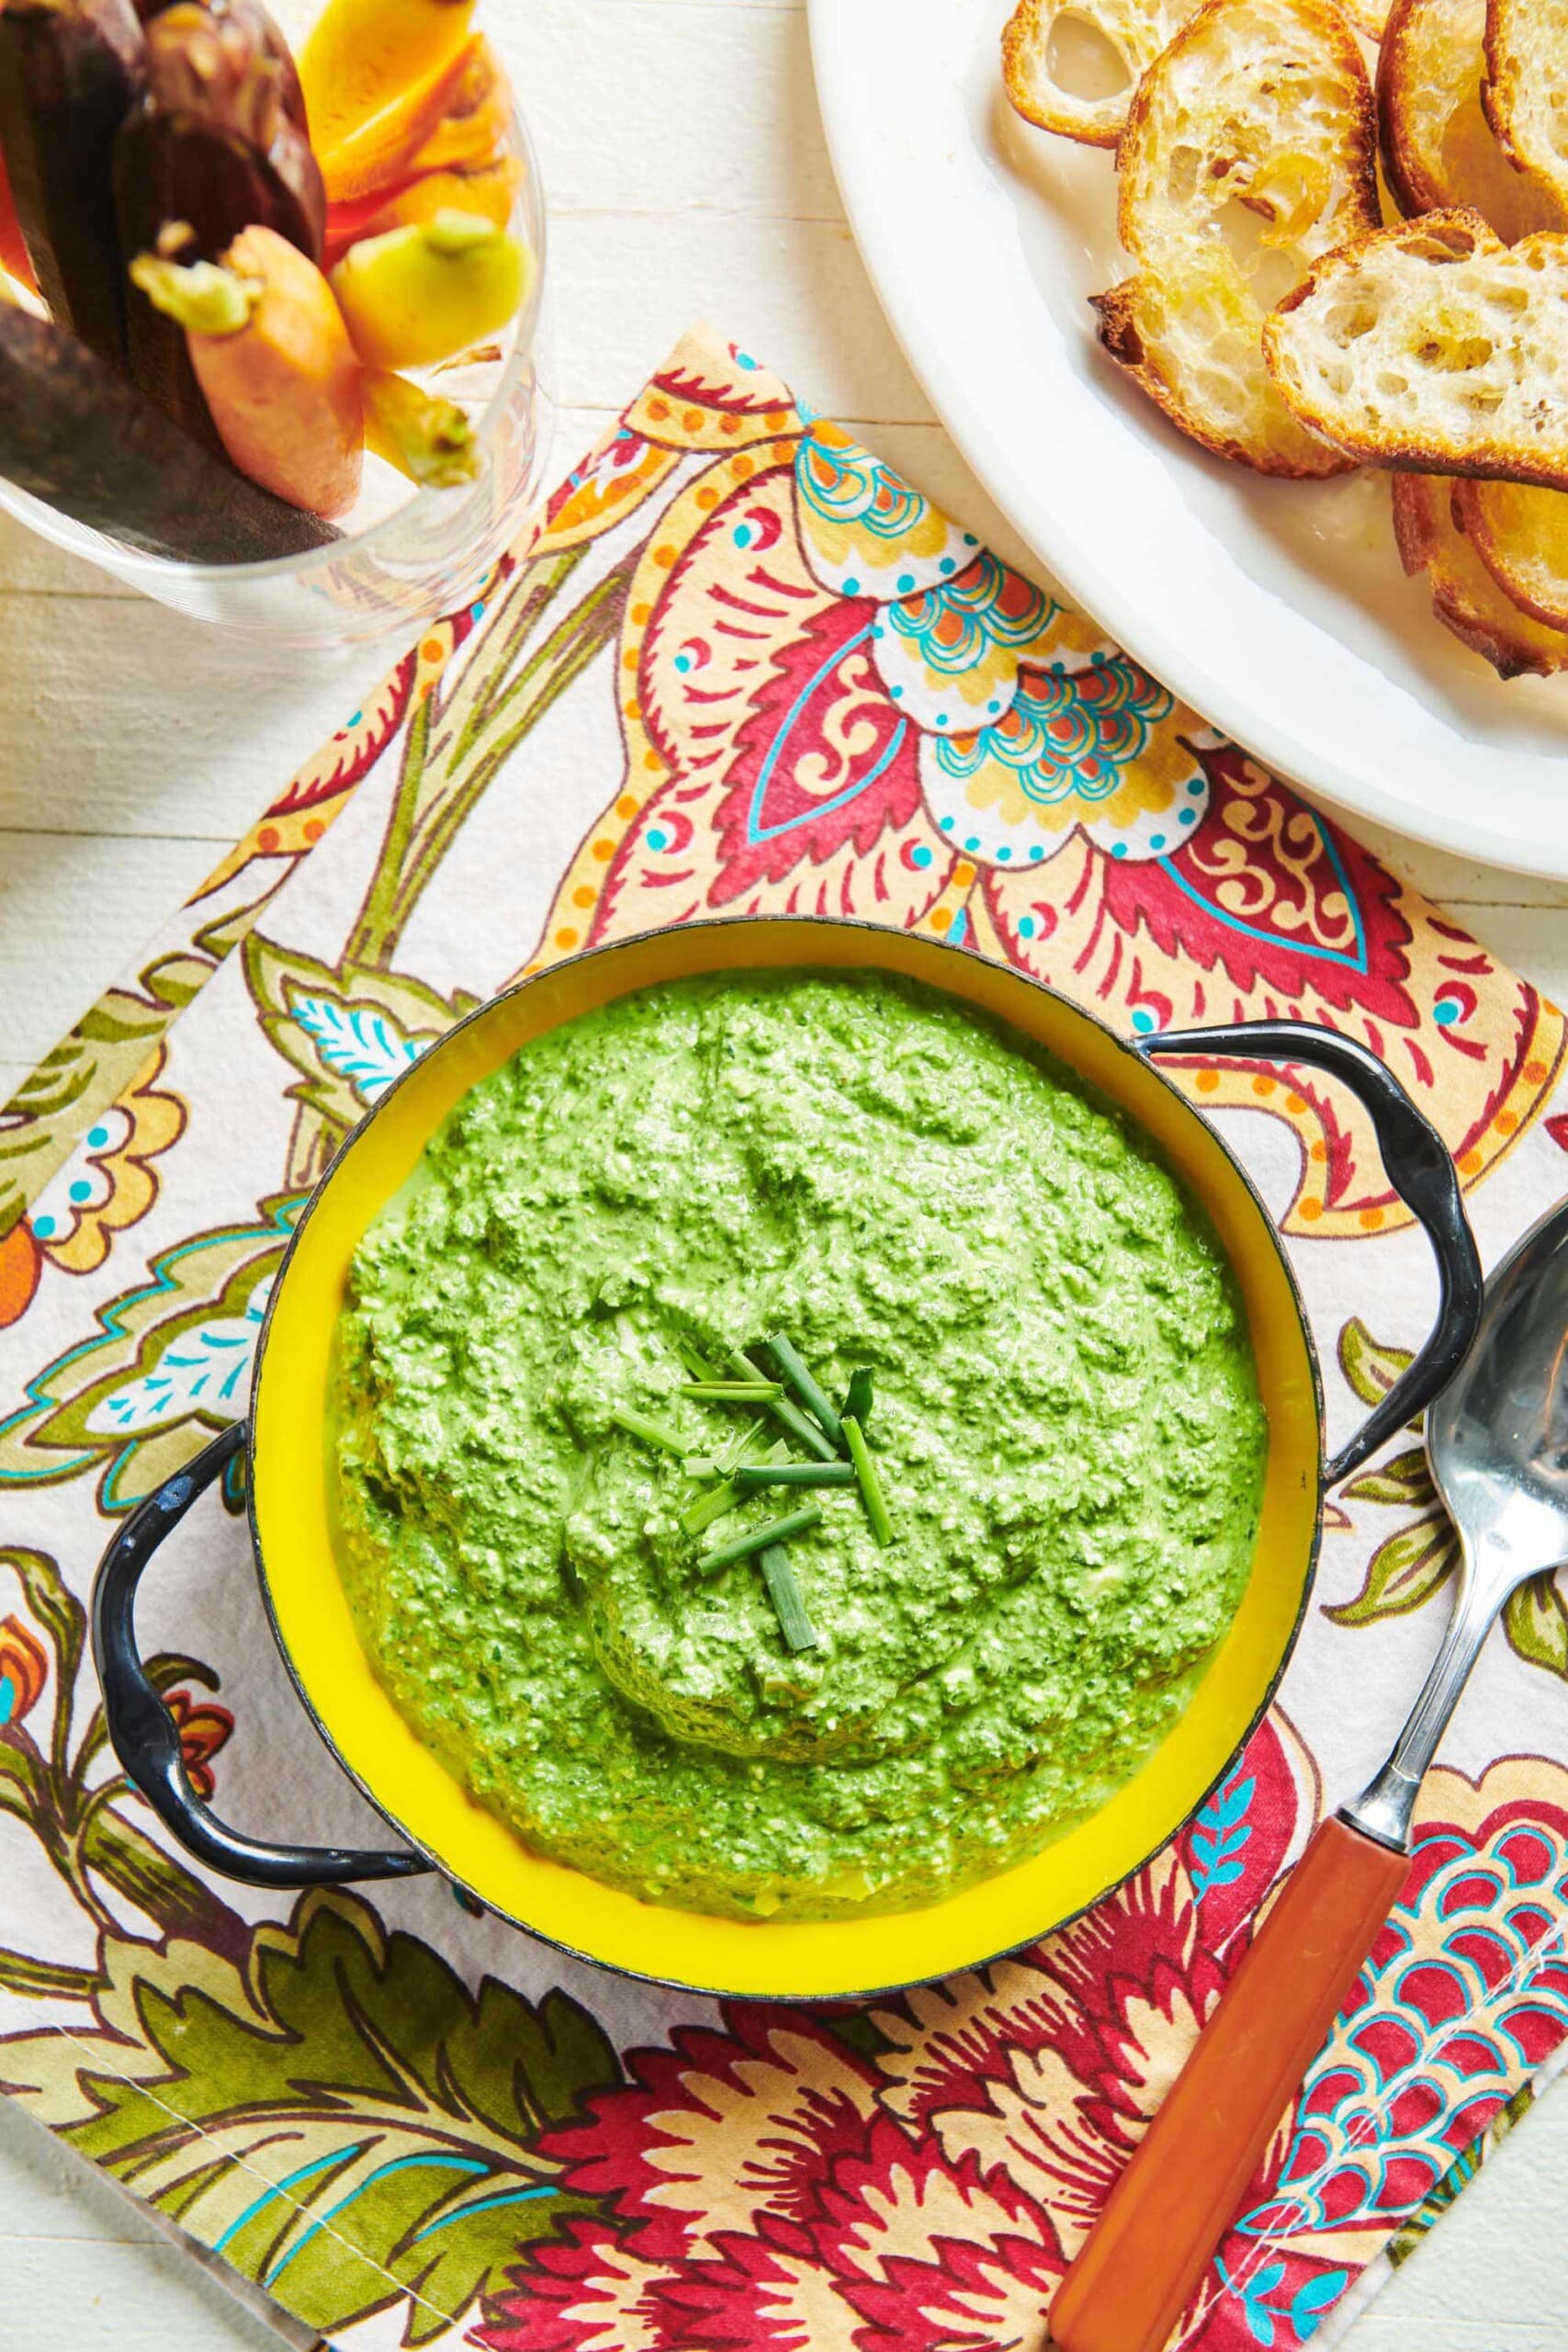 Bowl of spinach feta party dip.